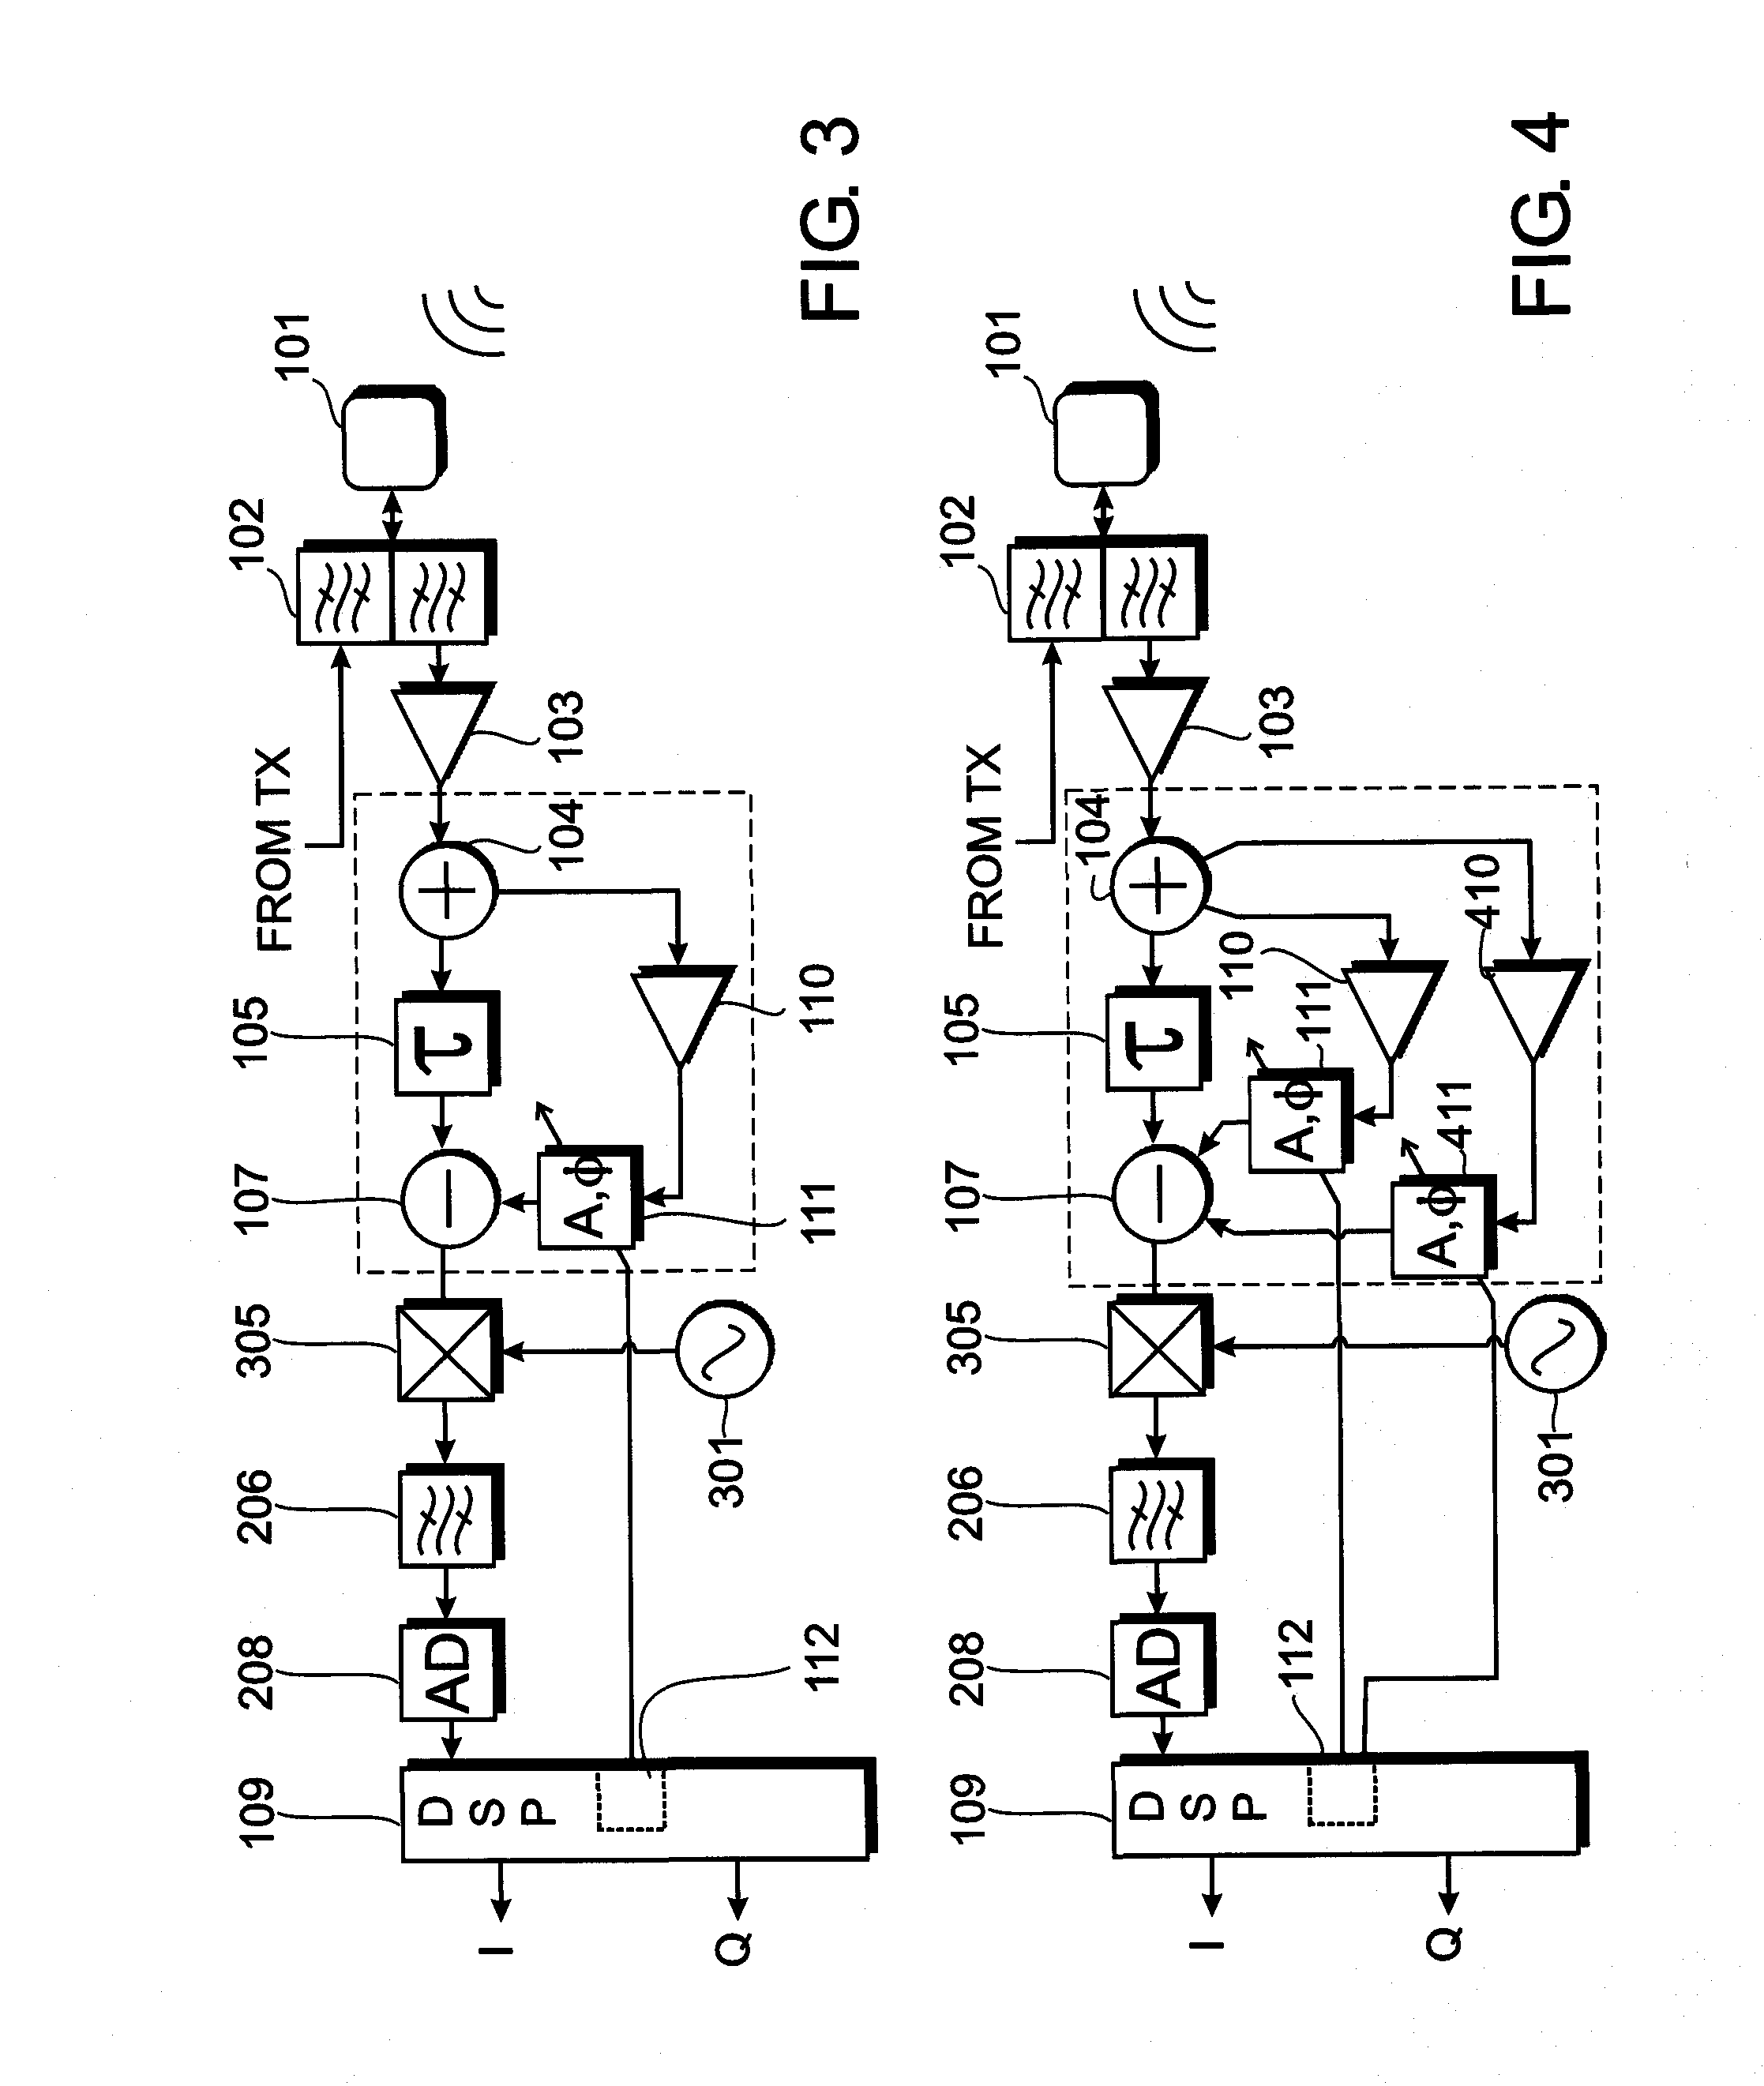 Mismatched delay based interference cancellation device and method